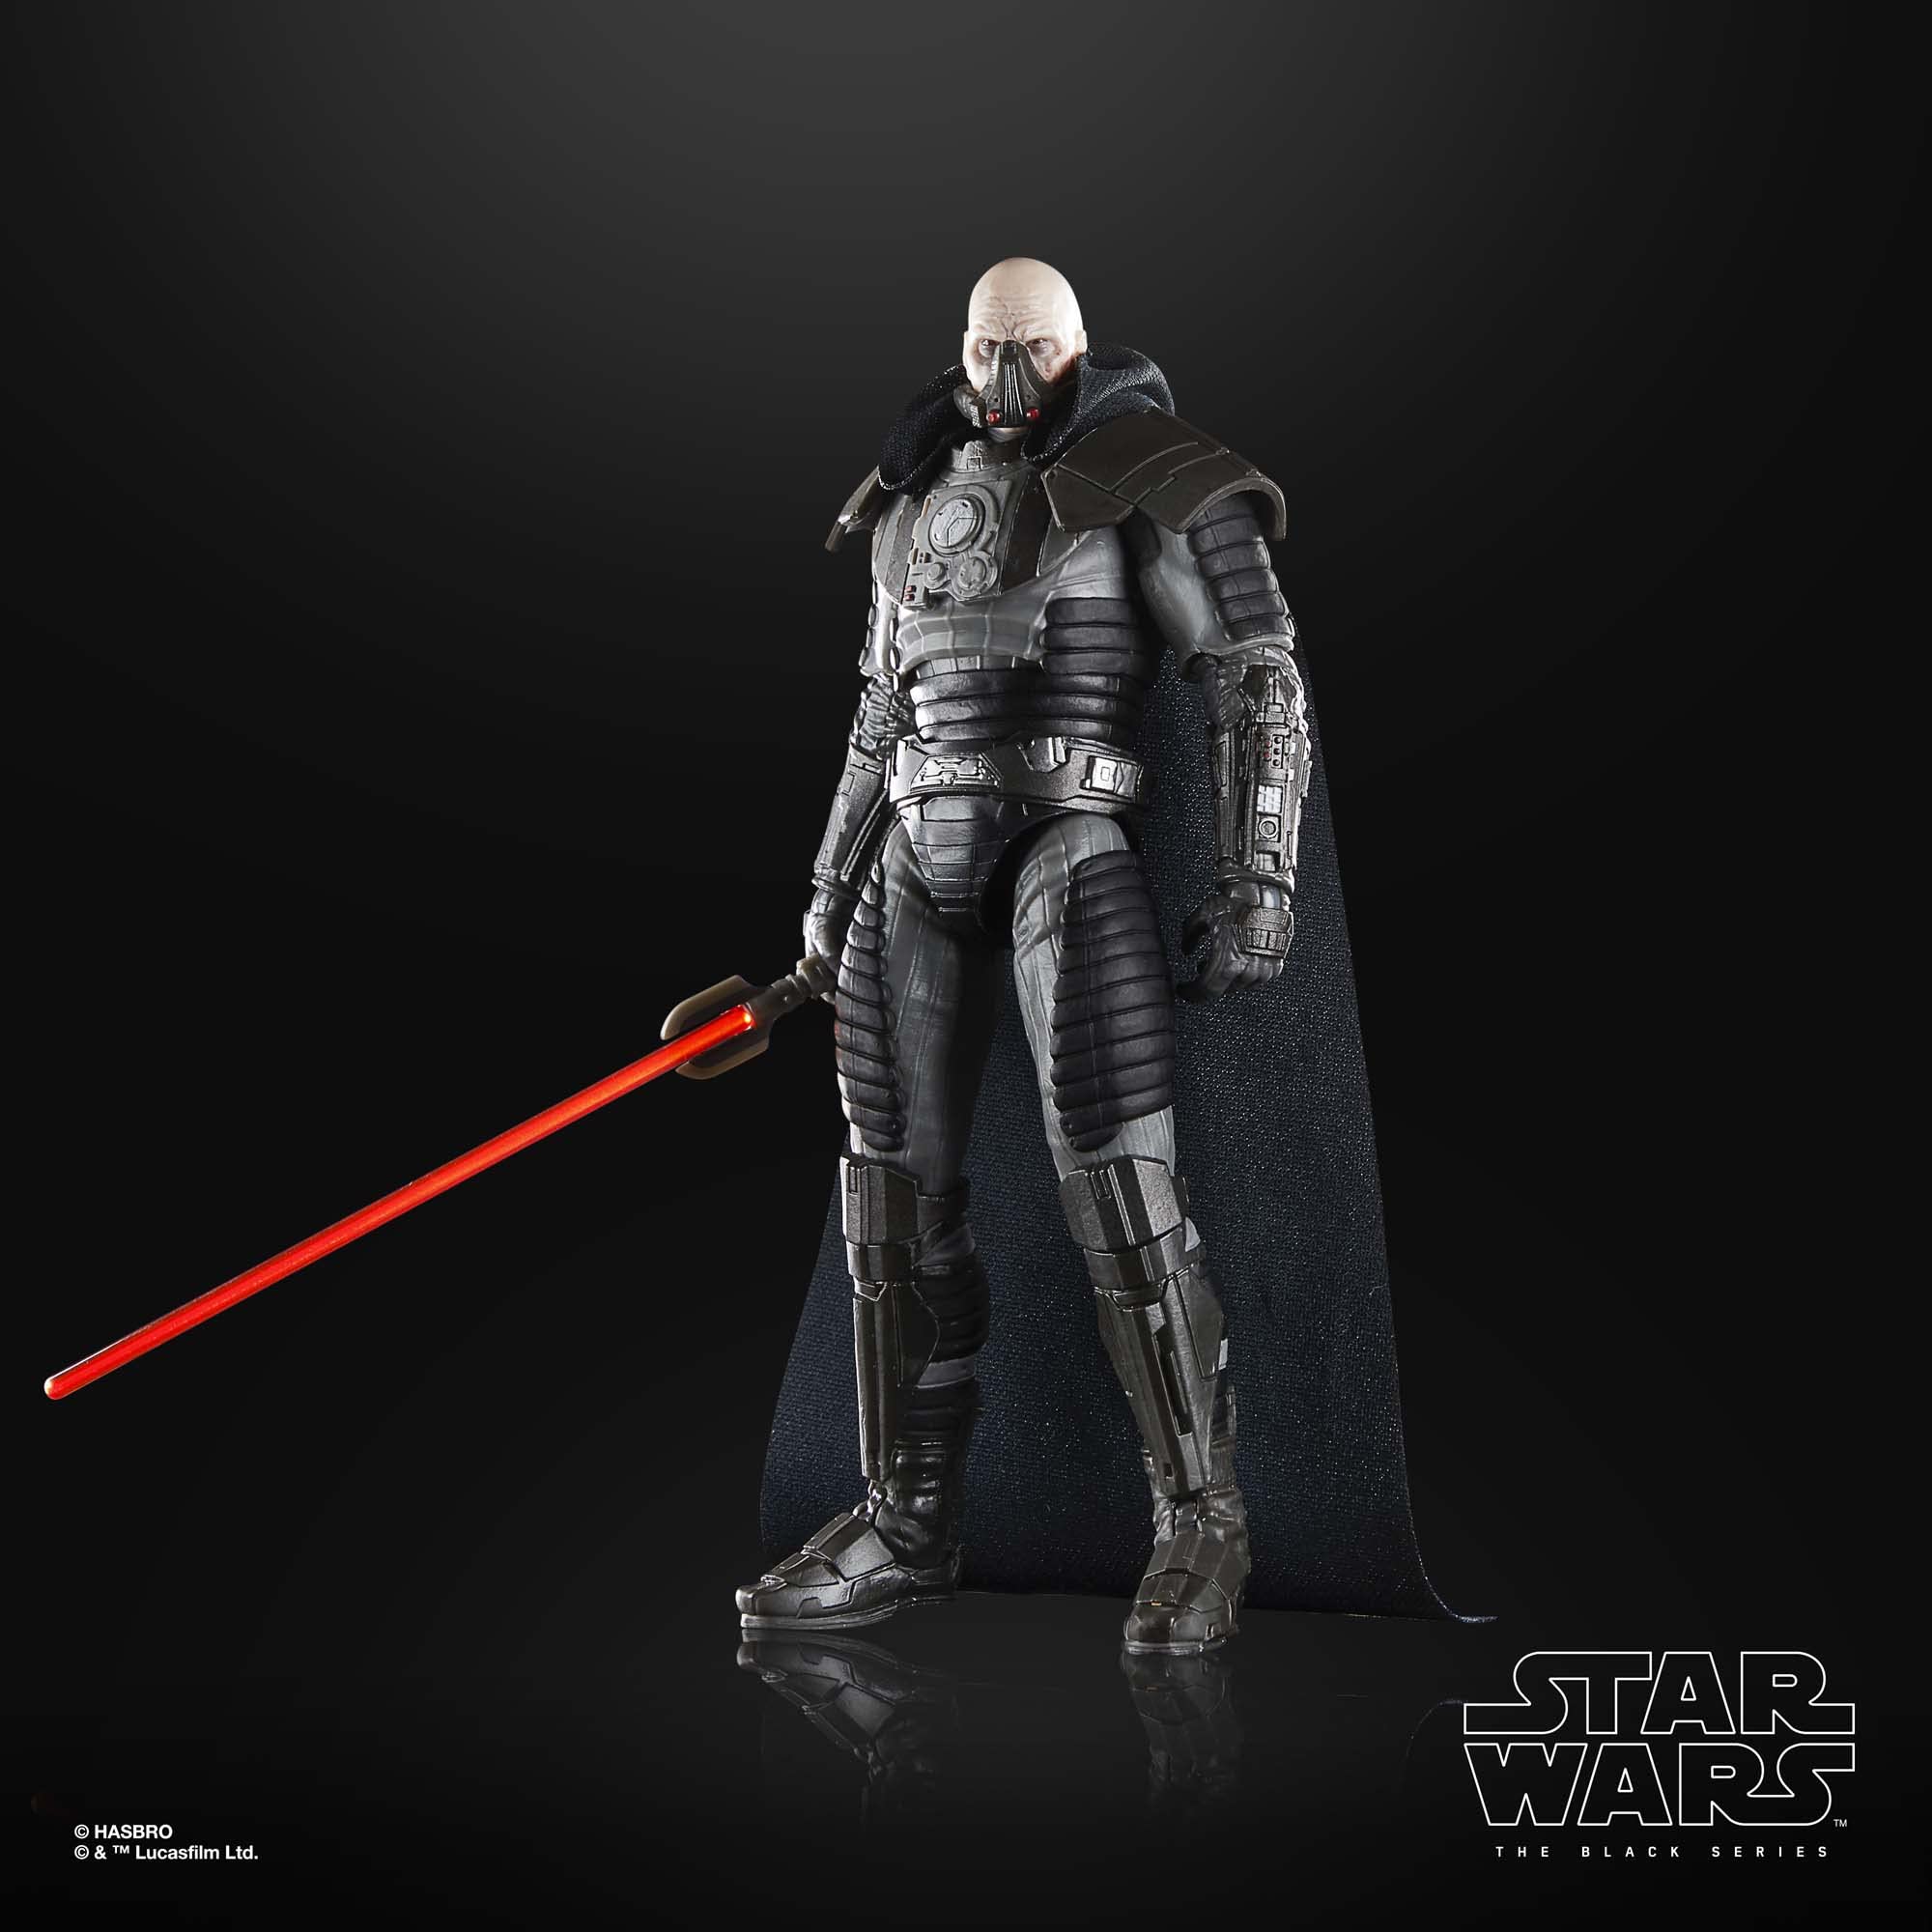 STAR WARS The Black Series Darth Malgus, The Old Republic 6-Inch Action Figures, Ages 4 and Up